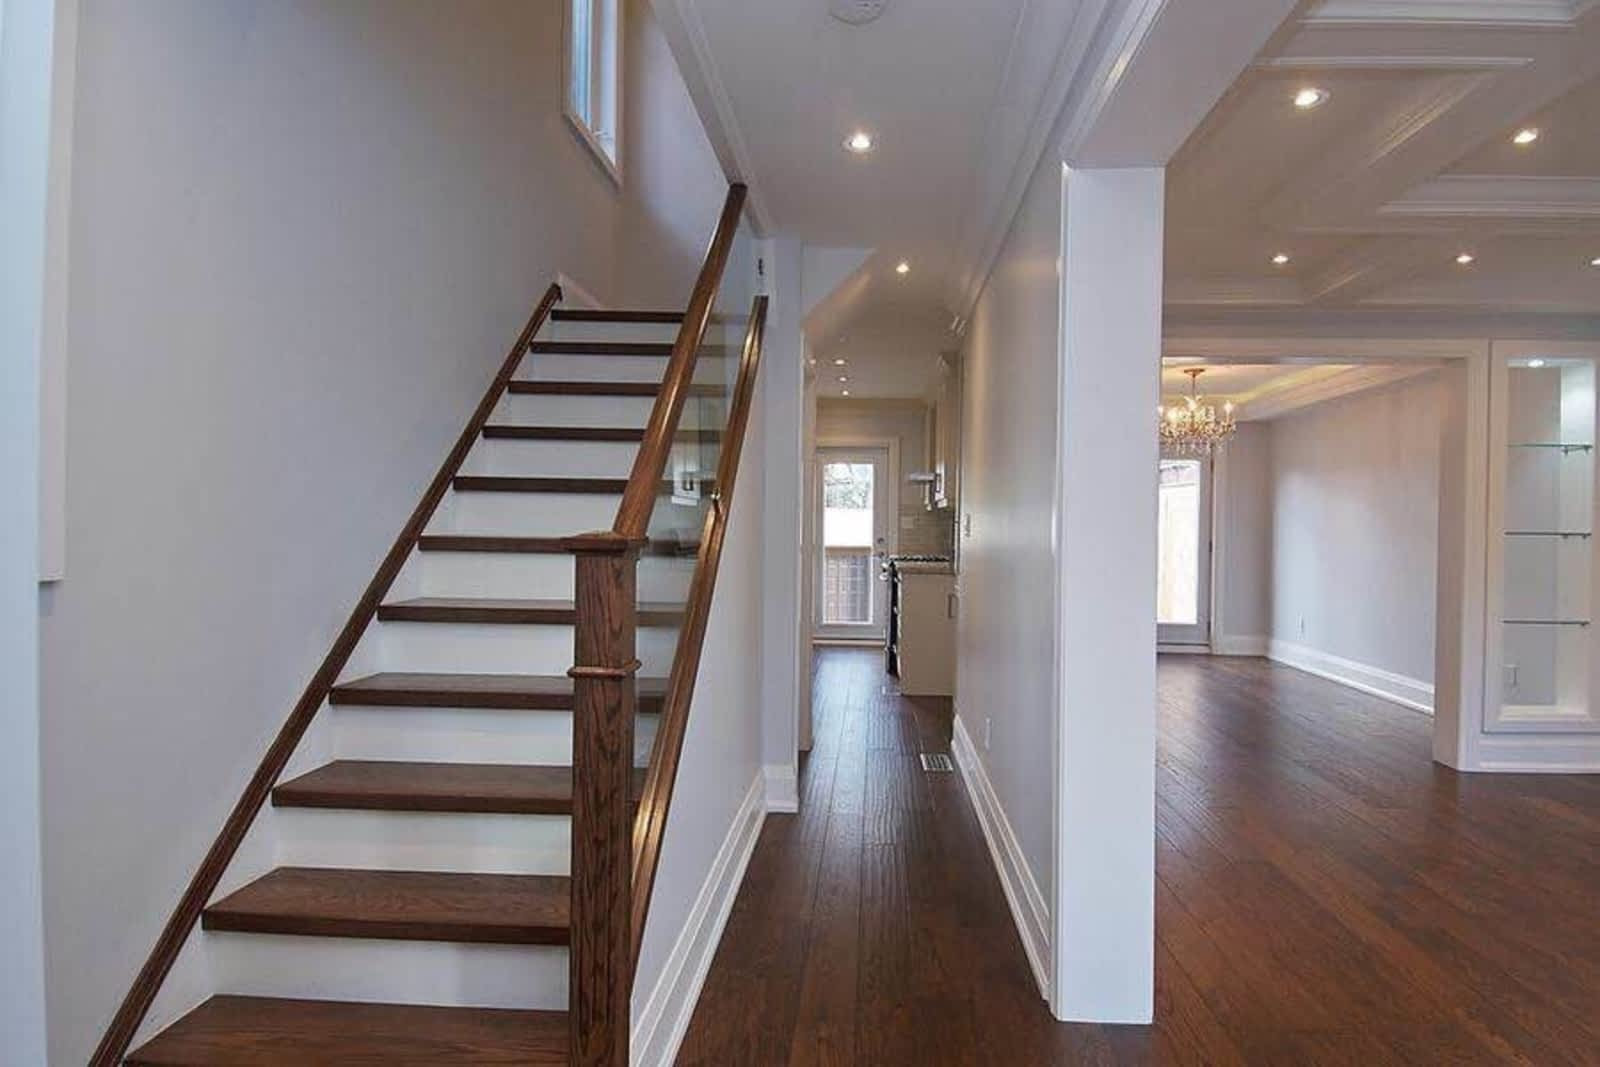 17 Spectacular Cost Of Refinishing Hardwood Floors toronto 2024 free download cost of refinishing hardwood floors toronto of dr flooring opening hours brampton on throughout dr flooring 2